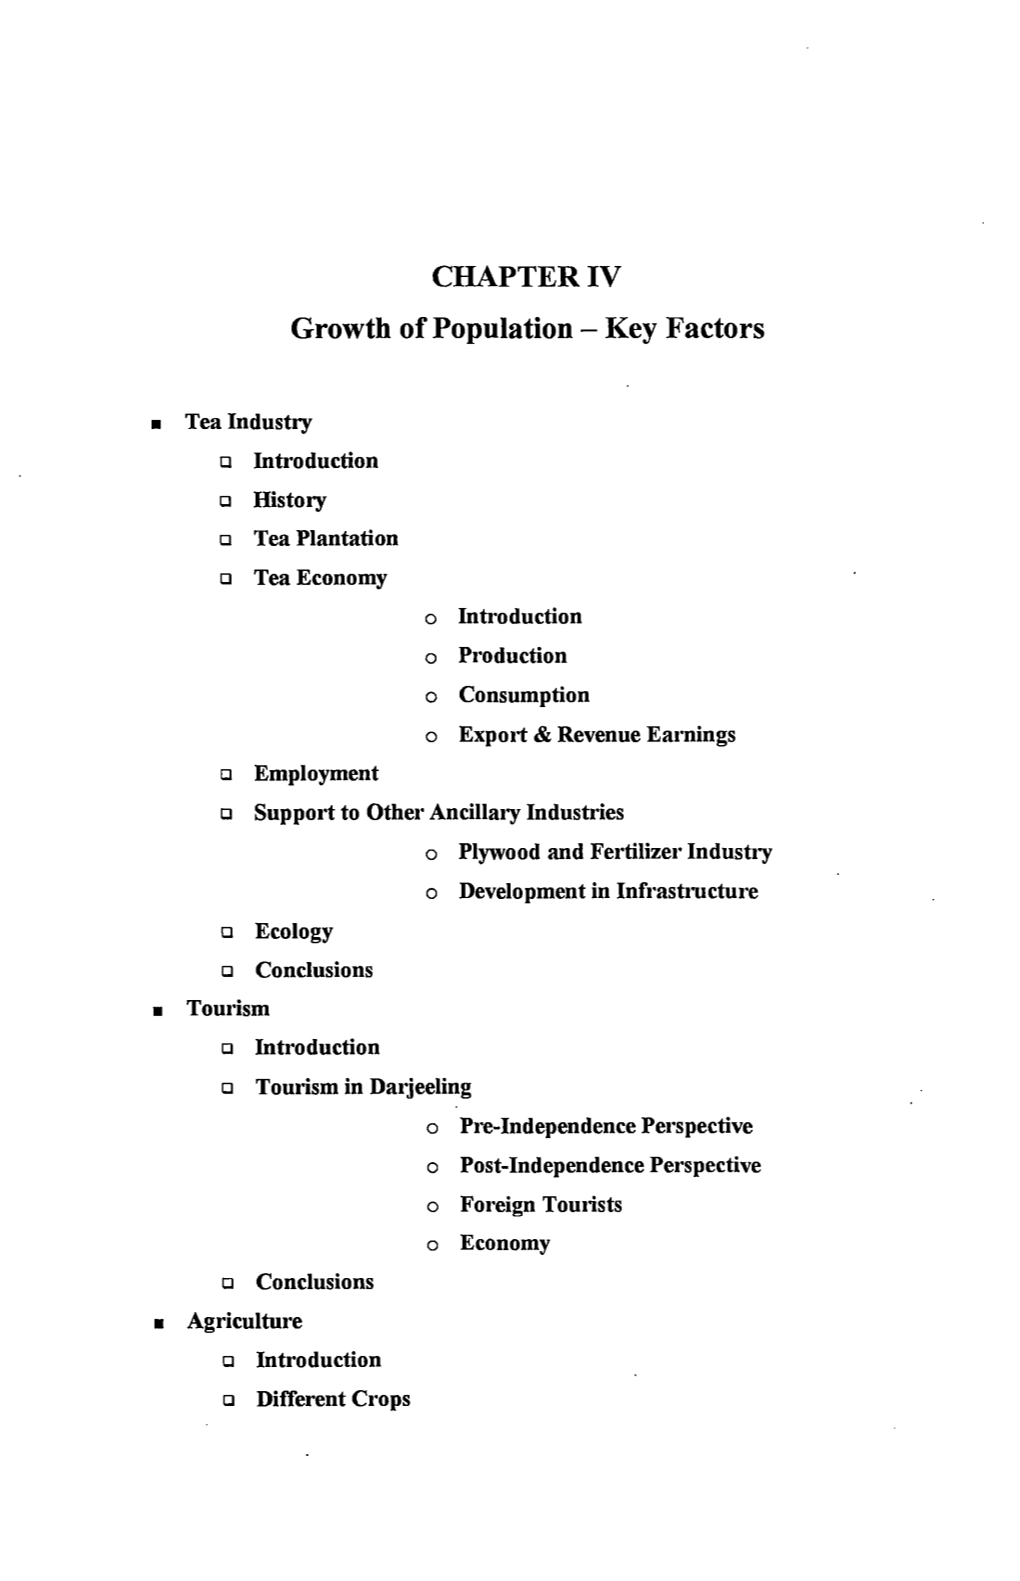 CHAPTER IV Growth of Population - Key Factors